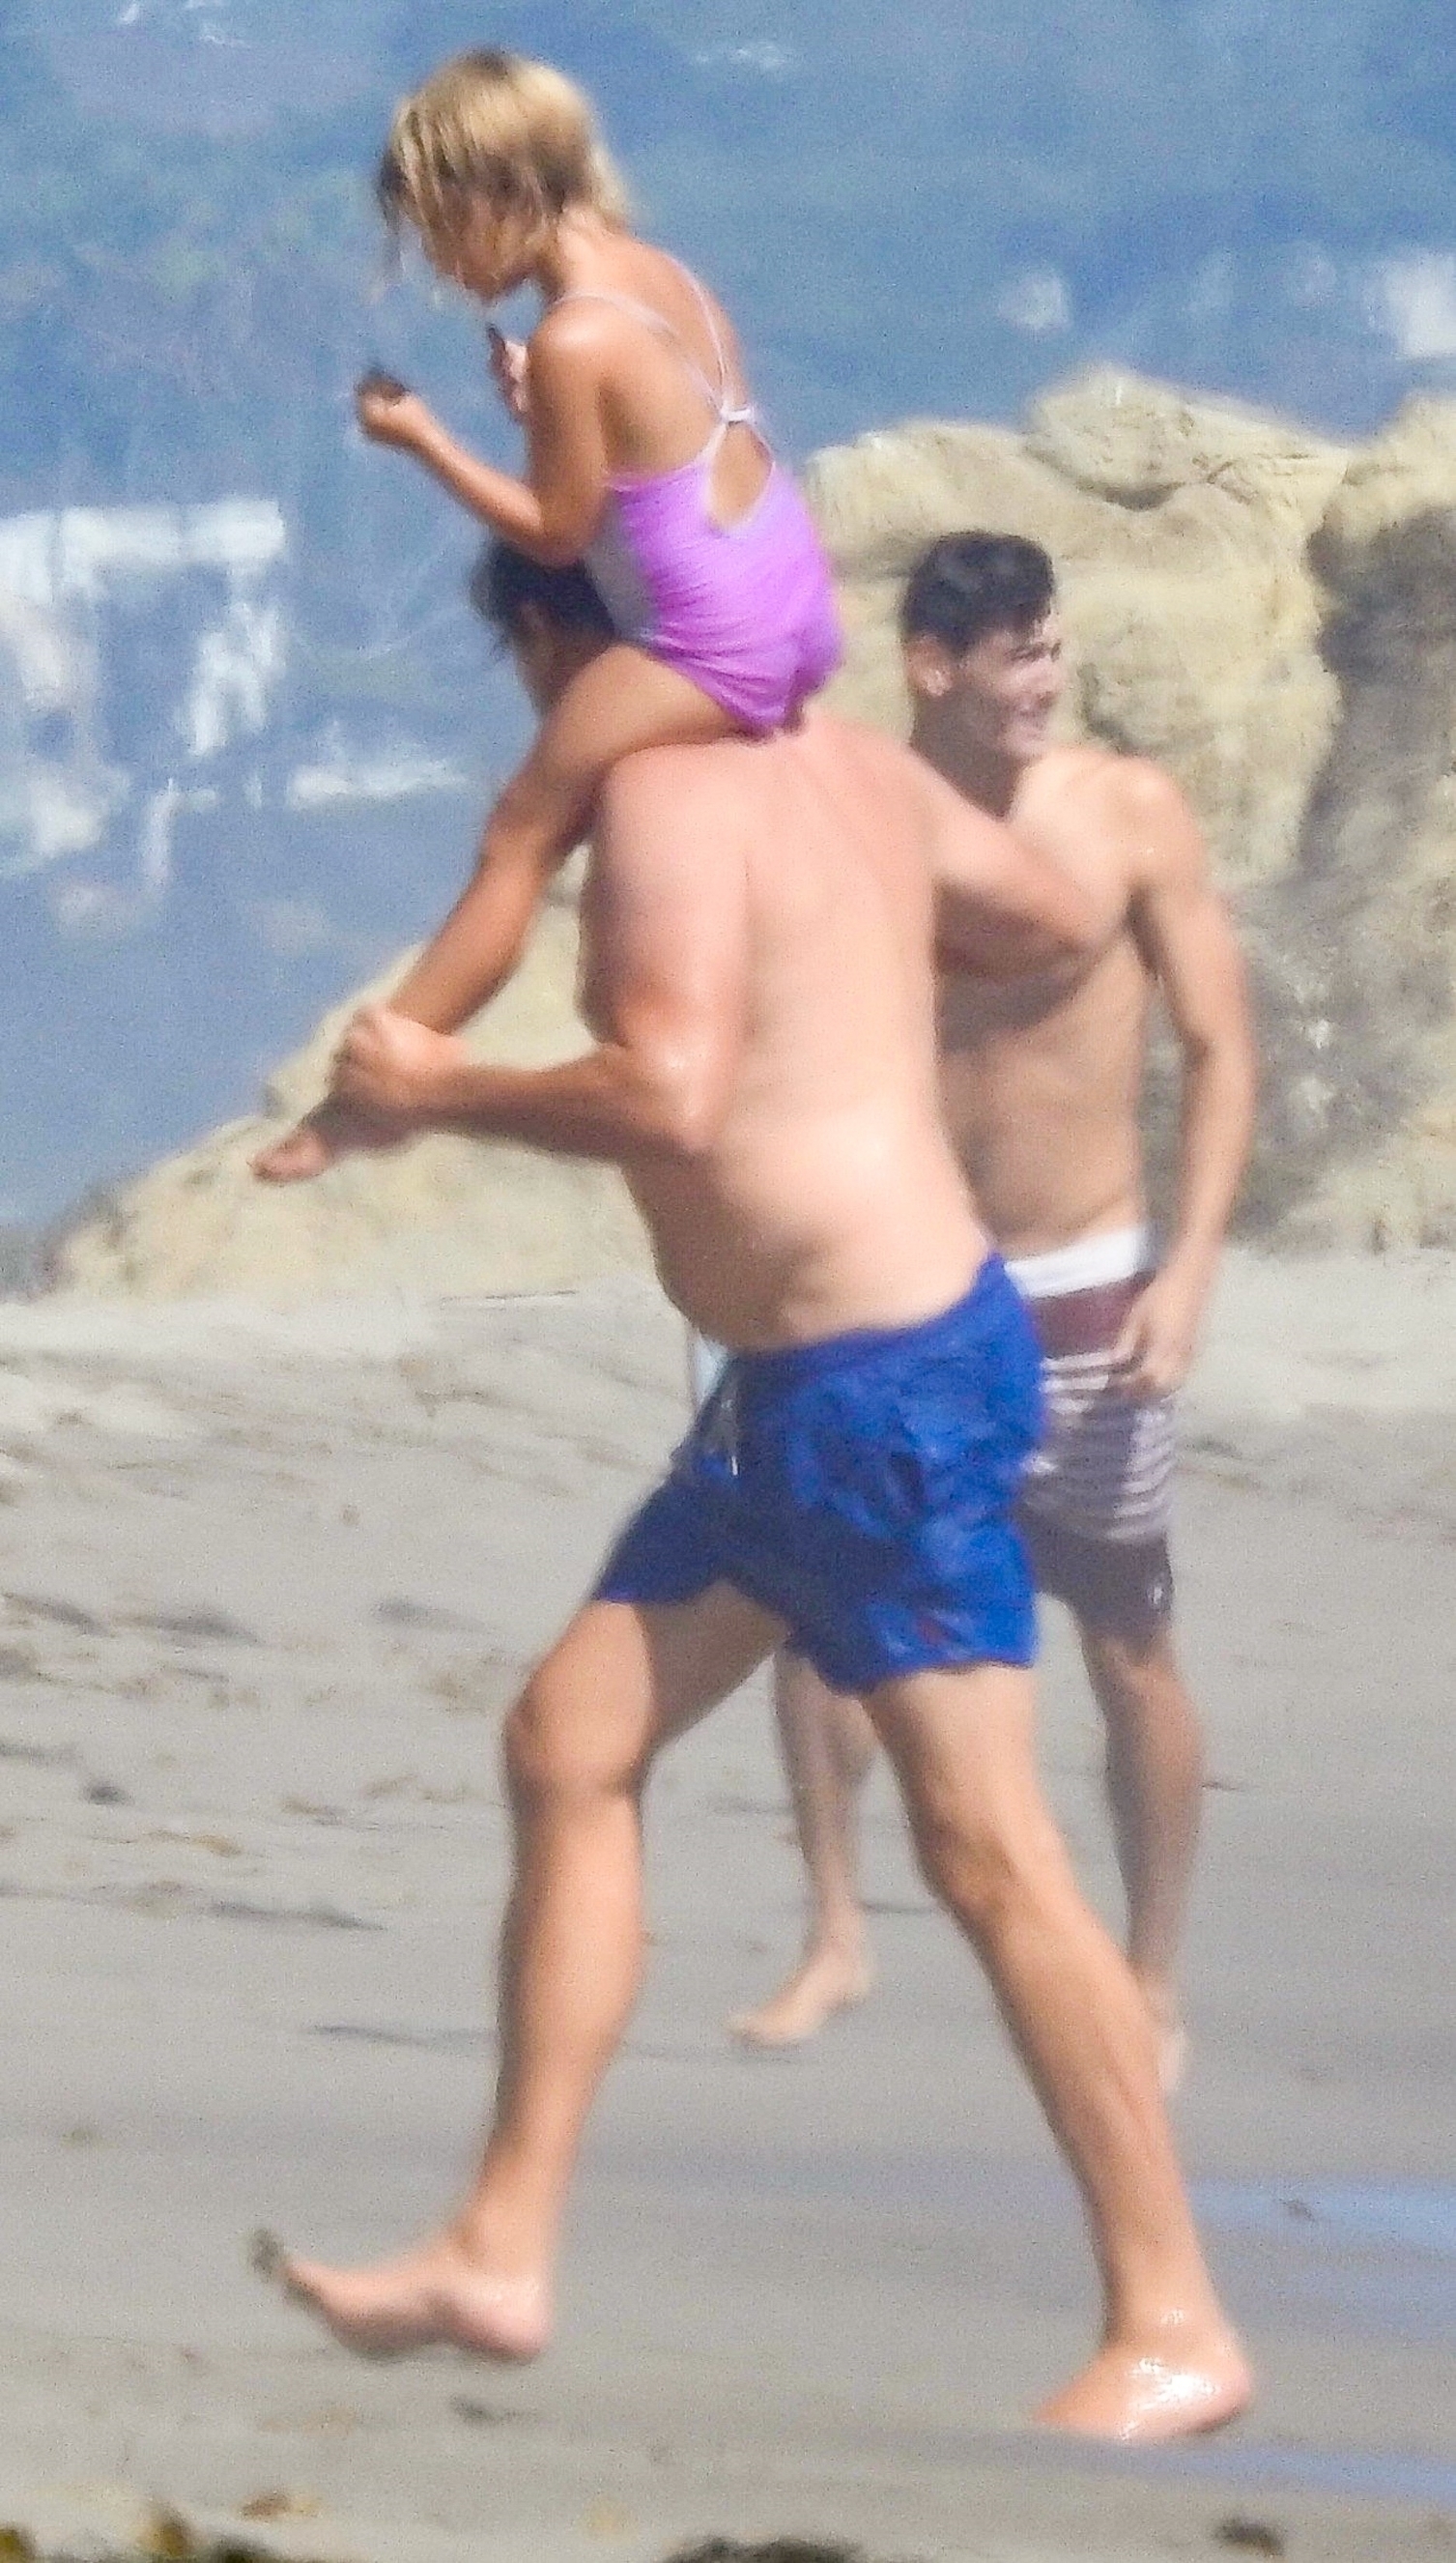 Malibu, CA  - *EXCLUSIVE*  - Leonardo DiCaprio cools off in the ocean while enjoying a fun summer day at the beach with his family in Malibu.

BACKGRID USA 14 AUGUST 2020,Image: 552613225, License: Rights-managed, Restrictions: , Model Release: no, Credit line: RMBI / BACKGRID / Backgrid USA / Profimedia